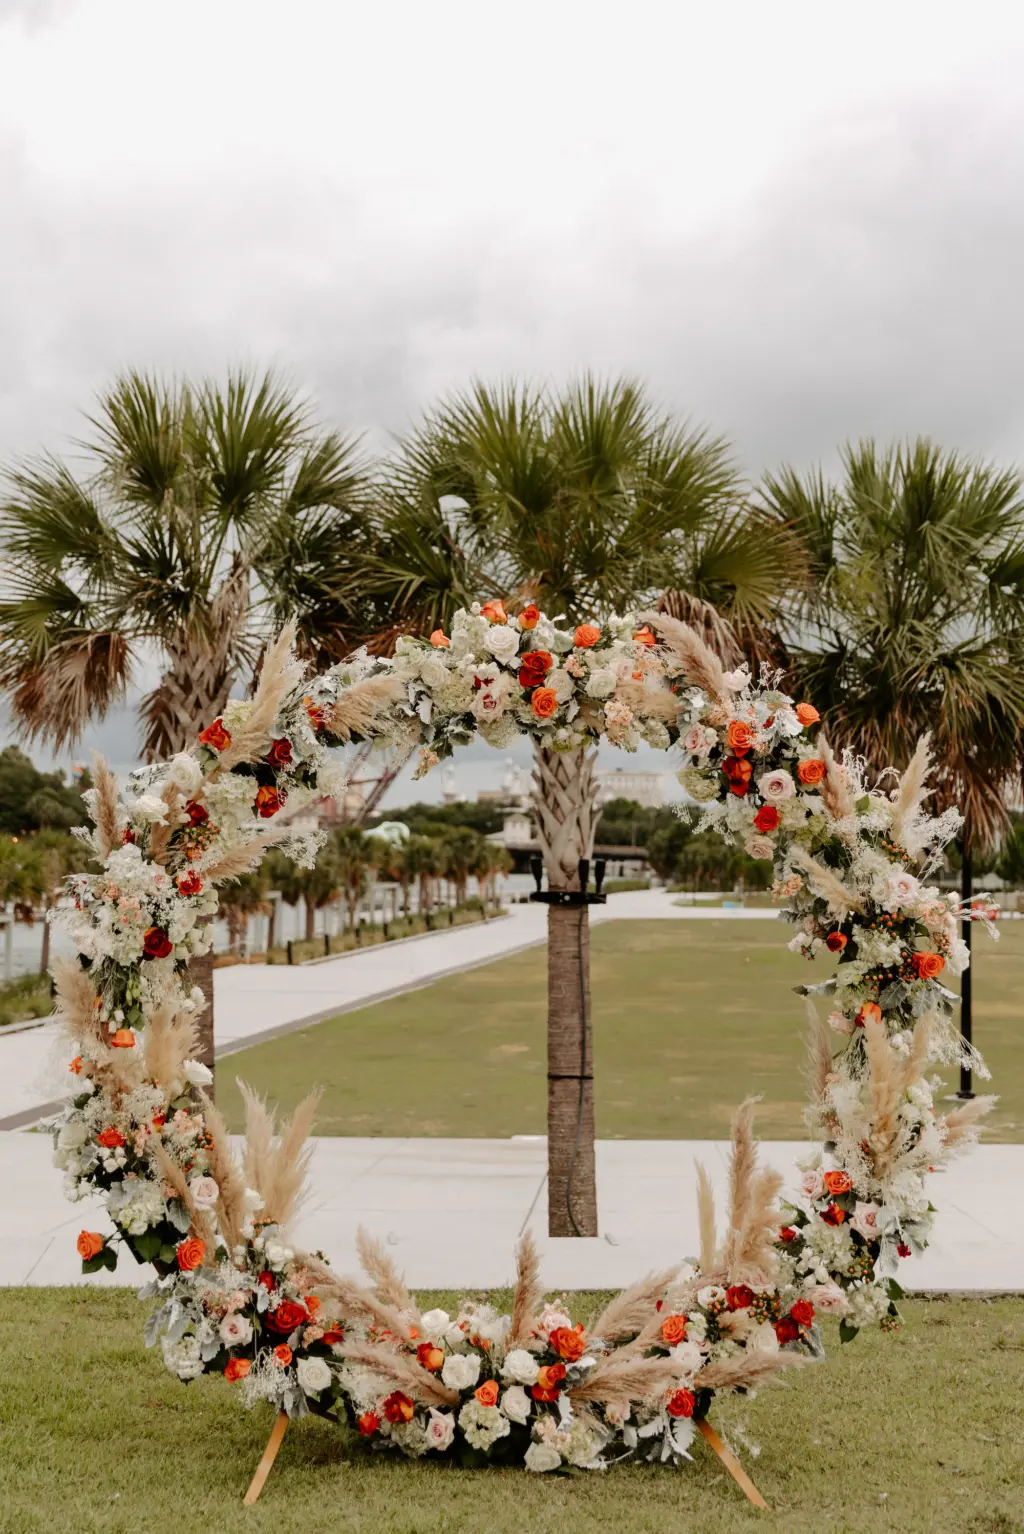 Round Boho Wedding Ceremony Arch Inspiration with Orange and Pink Roses, White Anemones, Pampas Grass, and Greenery